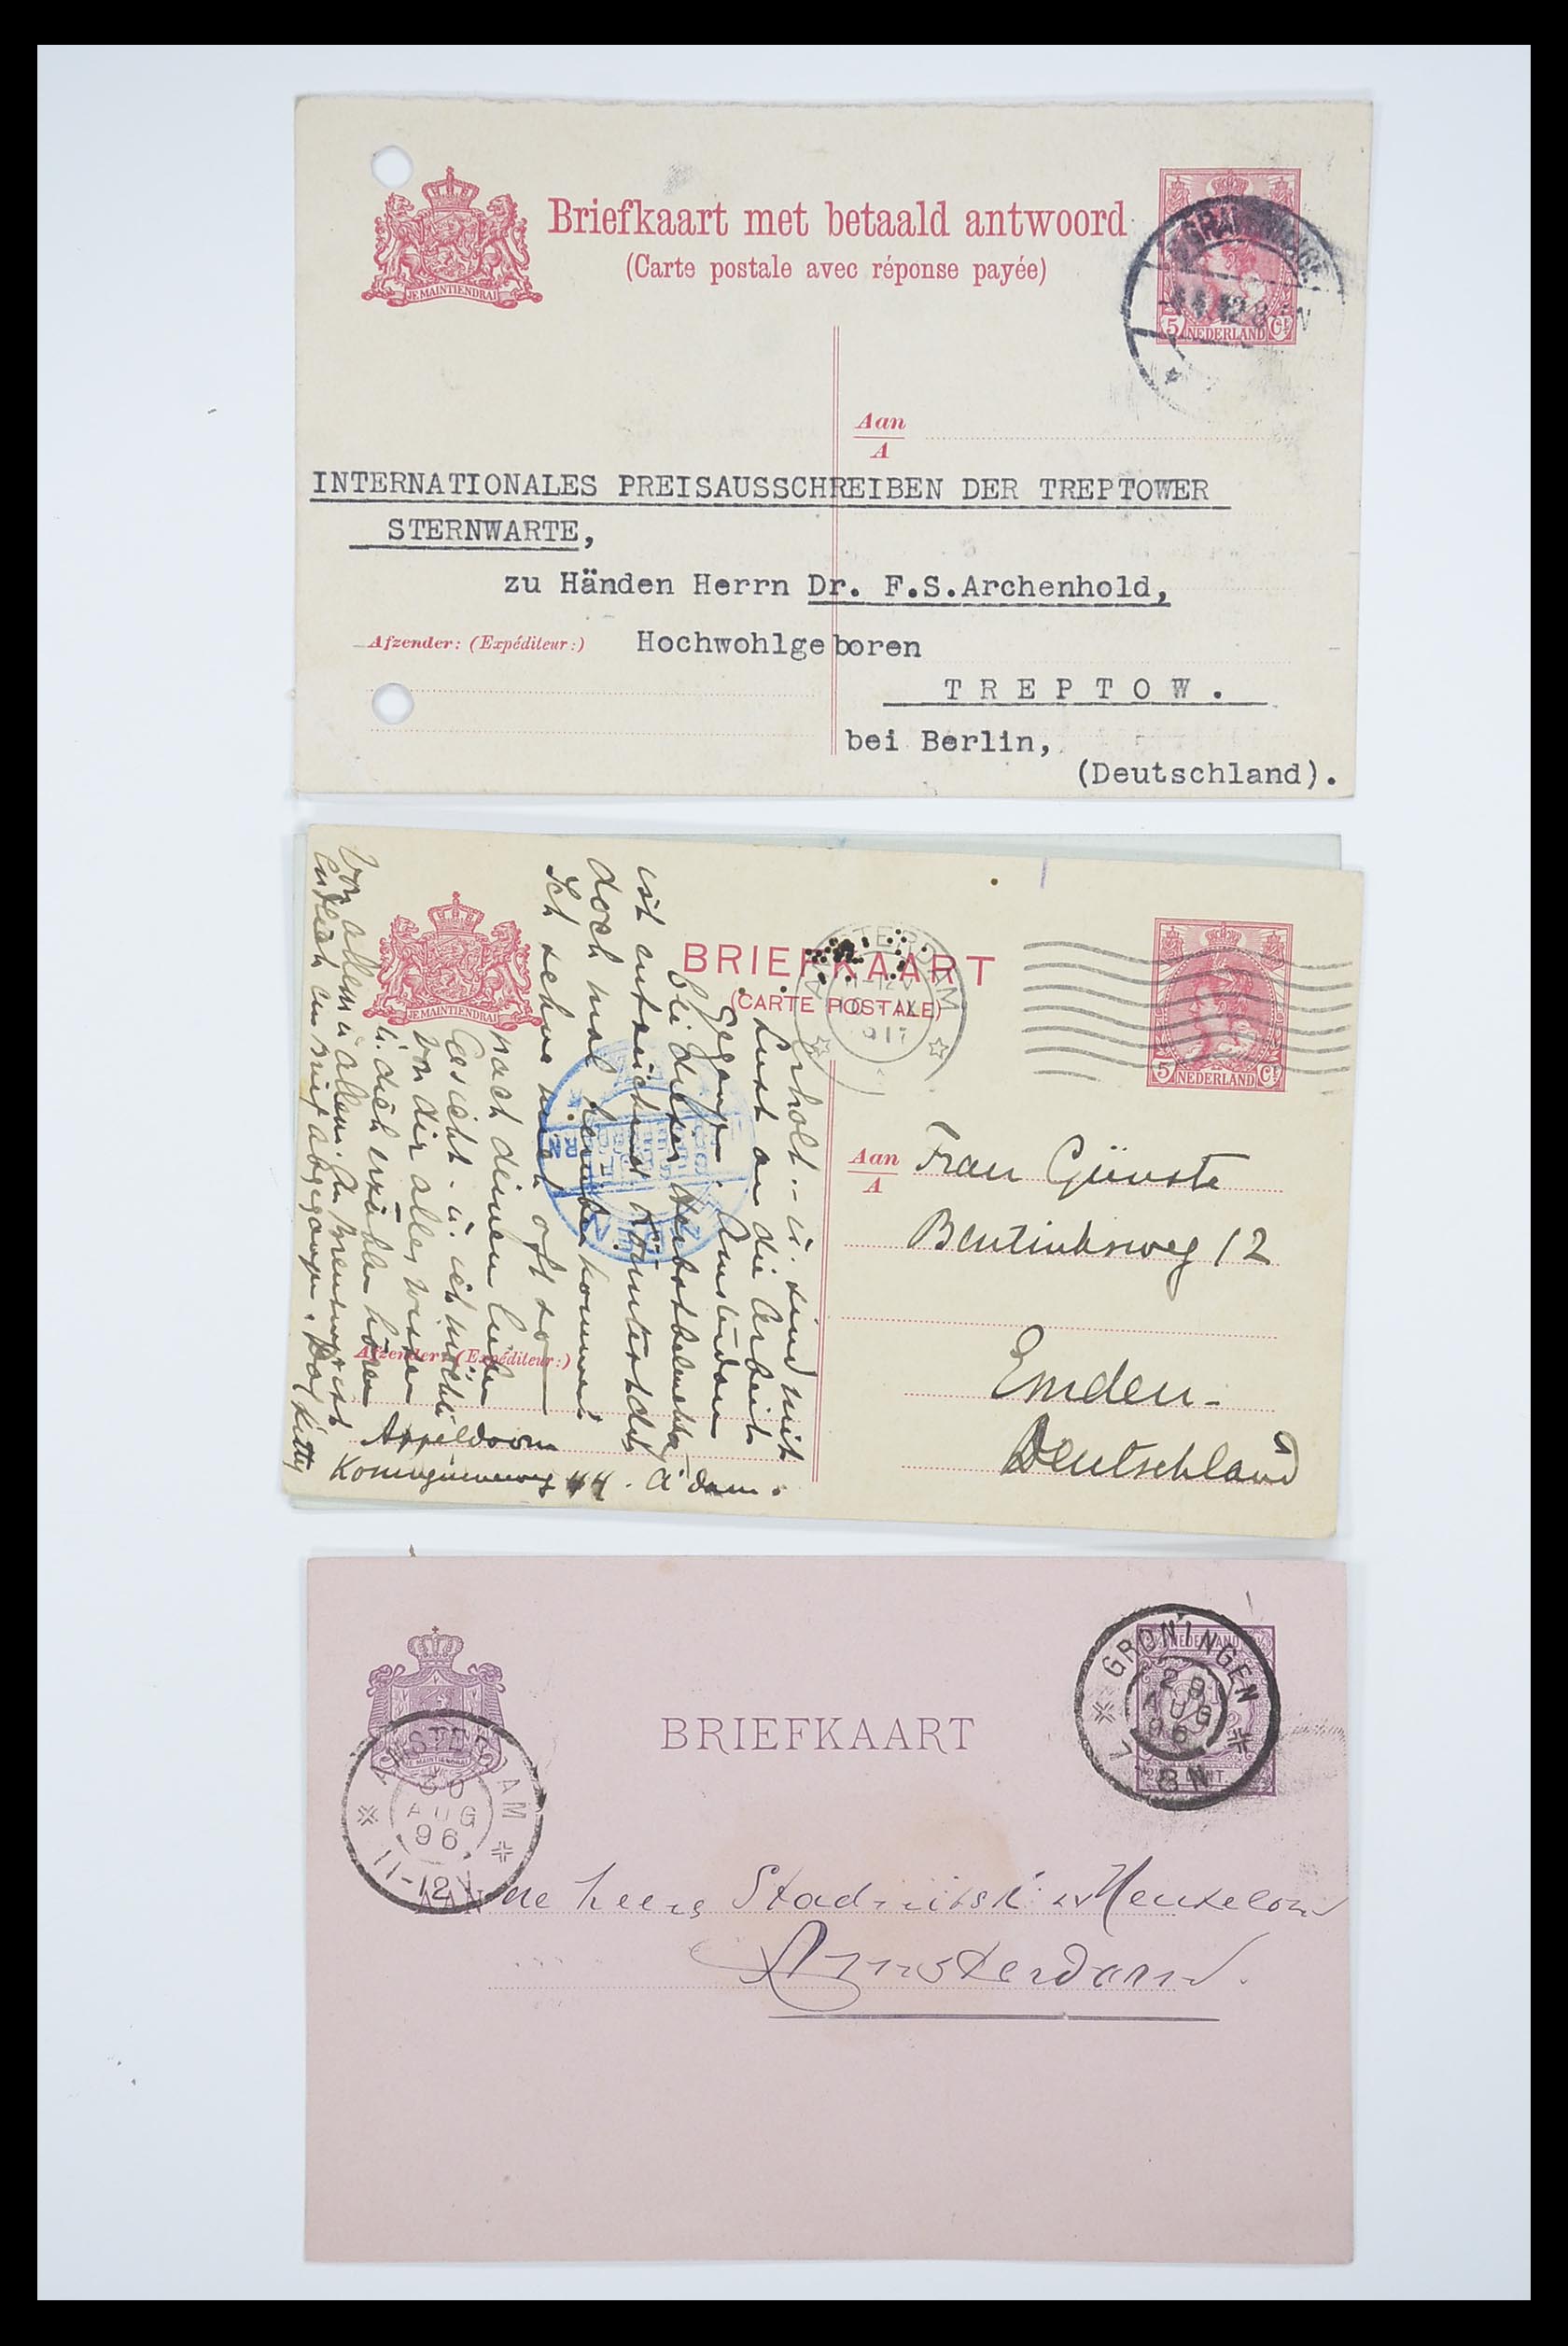 33536 016 - Stamp collection 33536 Netherlands covers 1800-1950.